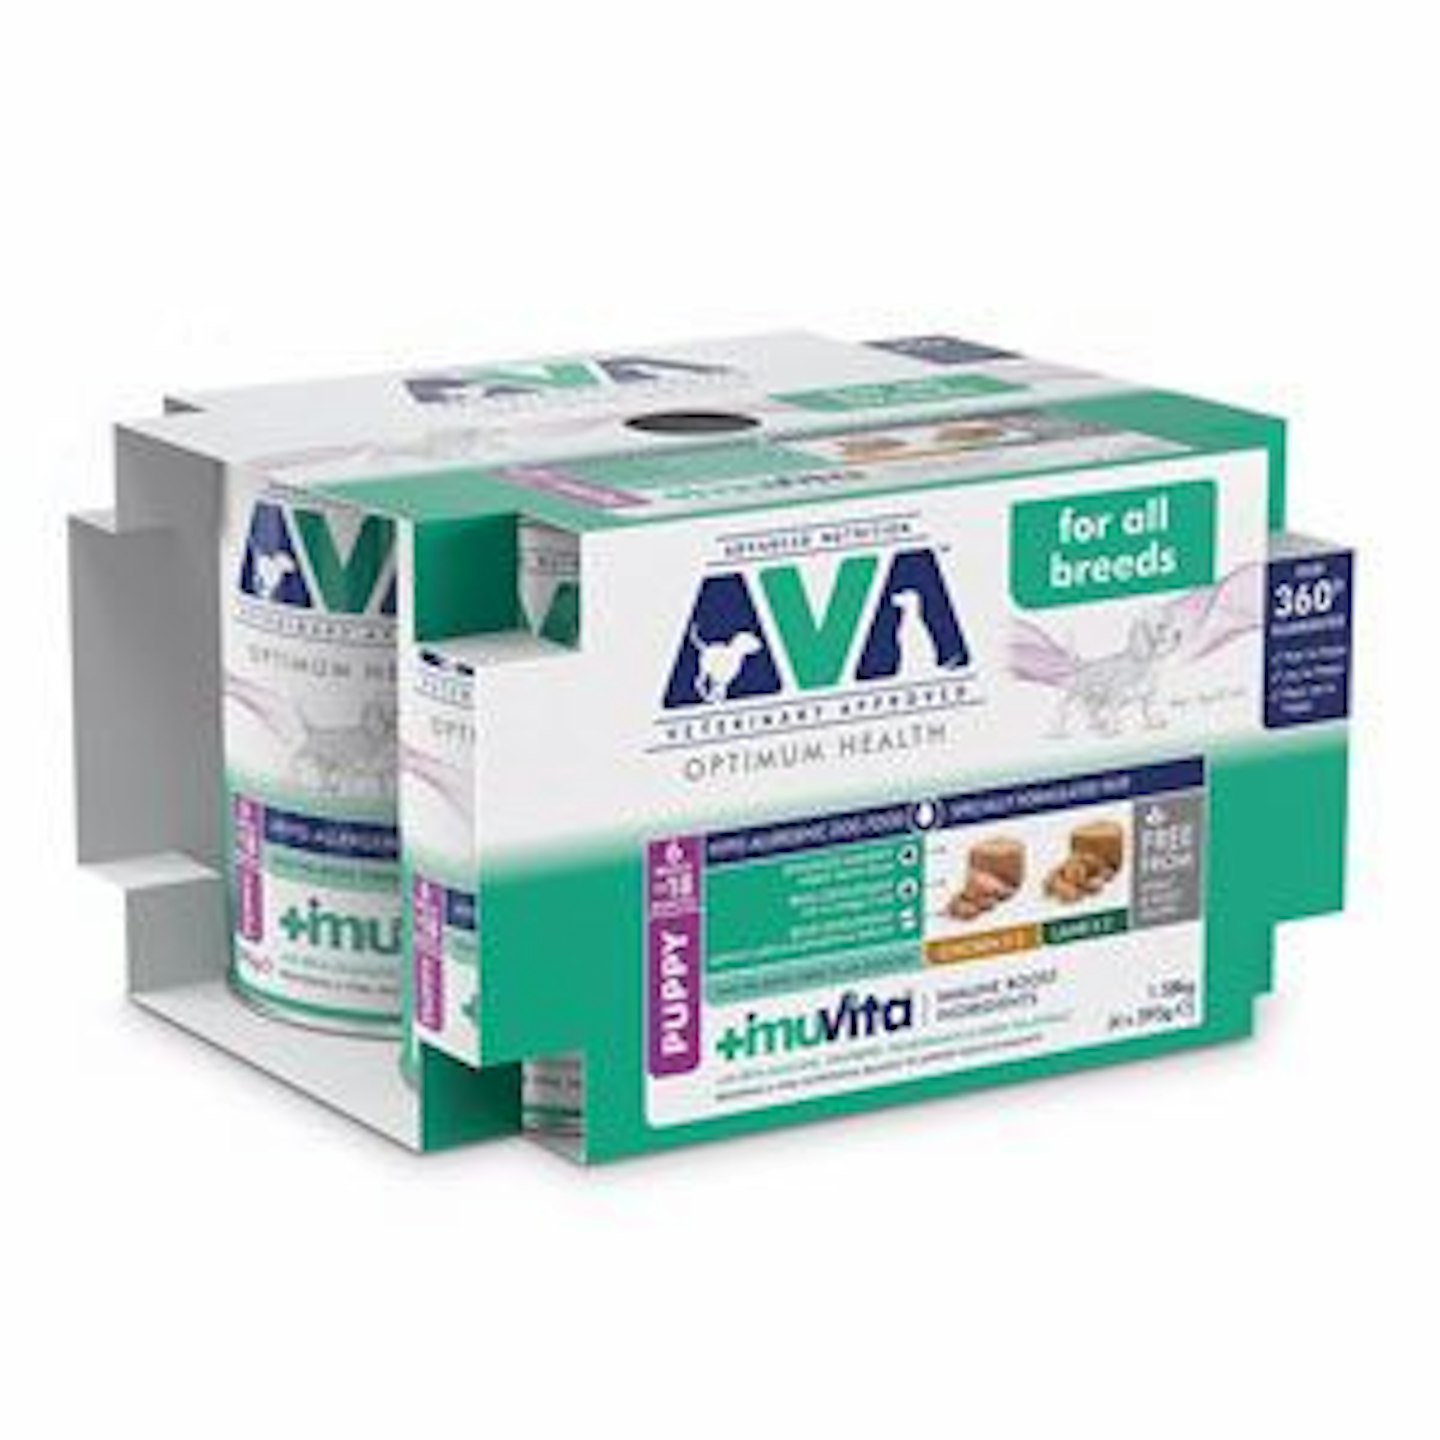 AVA Veterinary Approved Optimum Health Wet Puppy Food Chicken and Lamb Pate